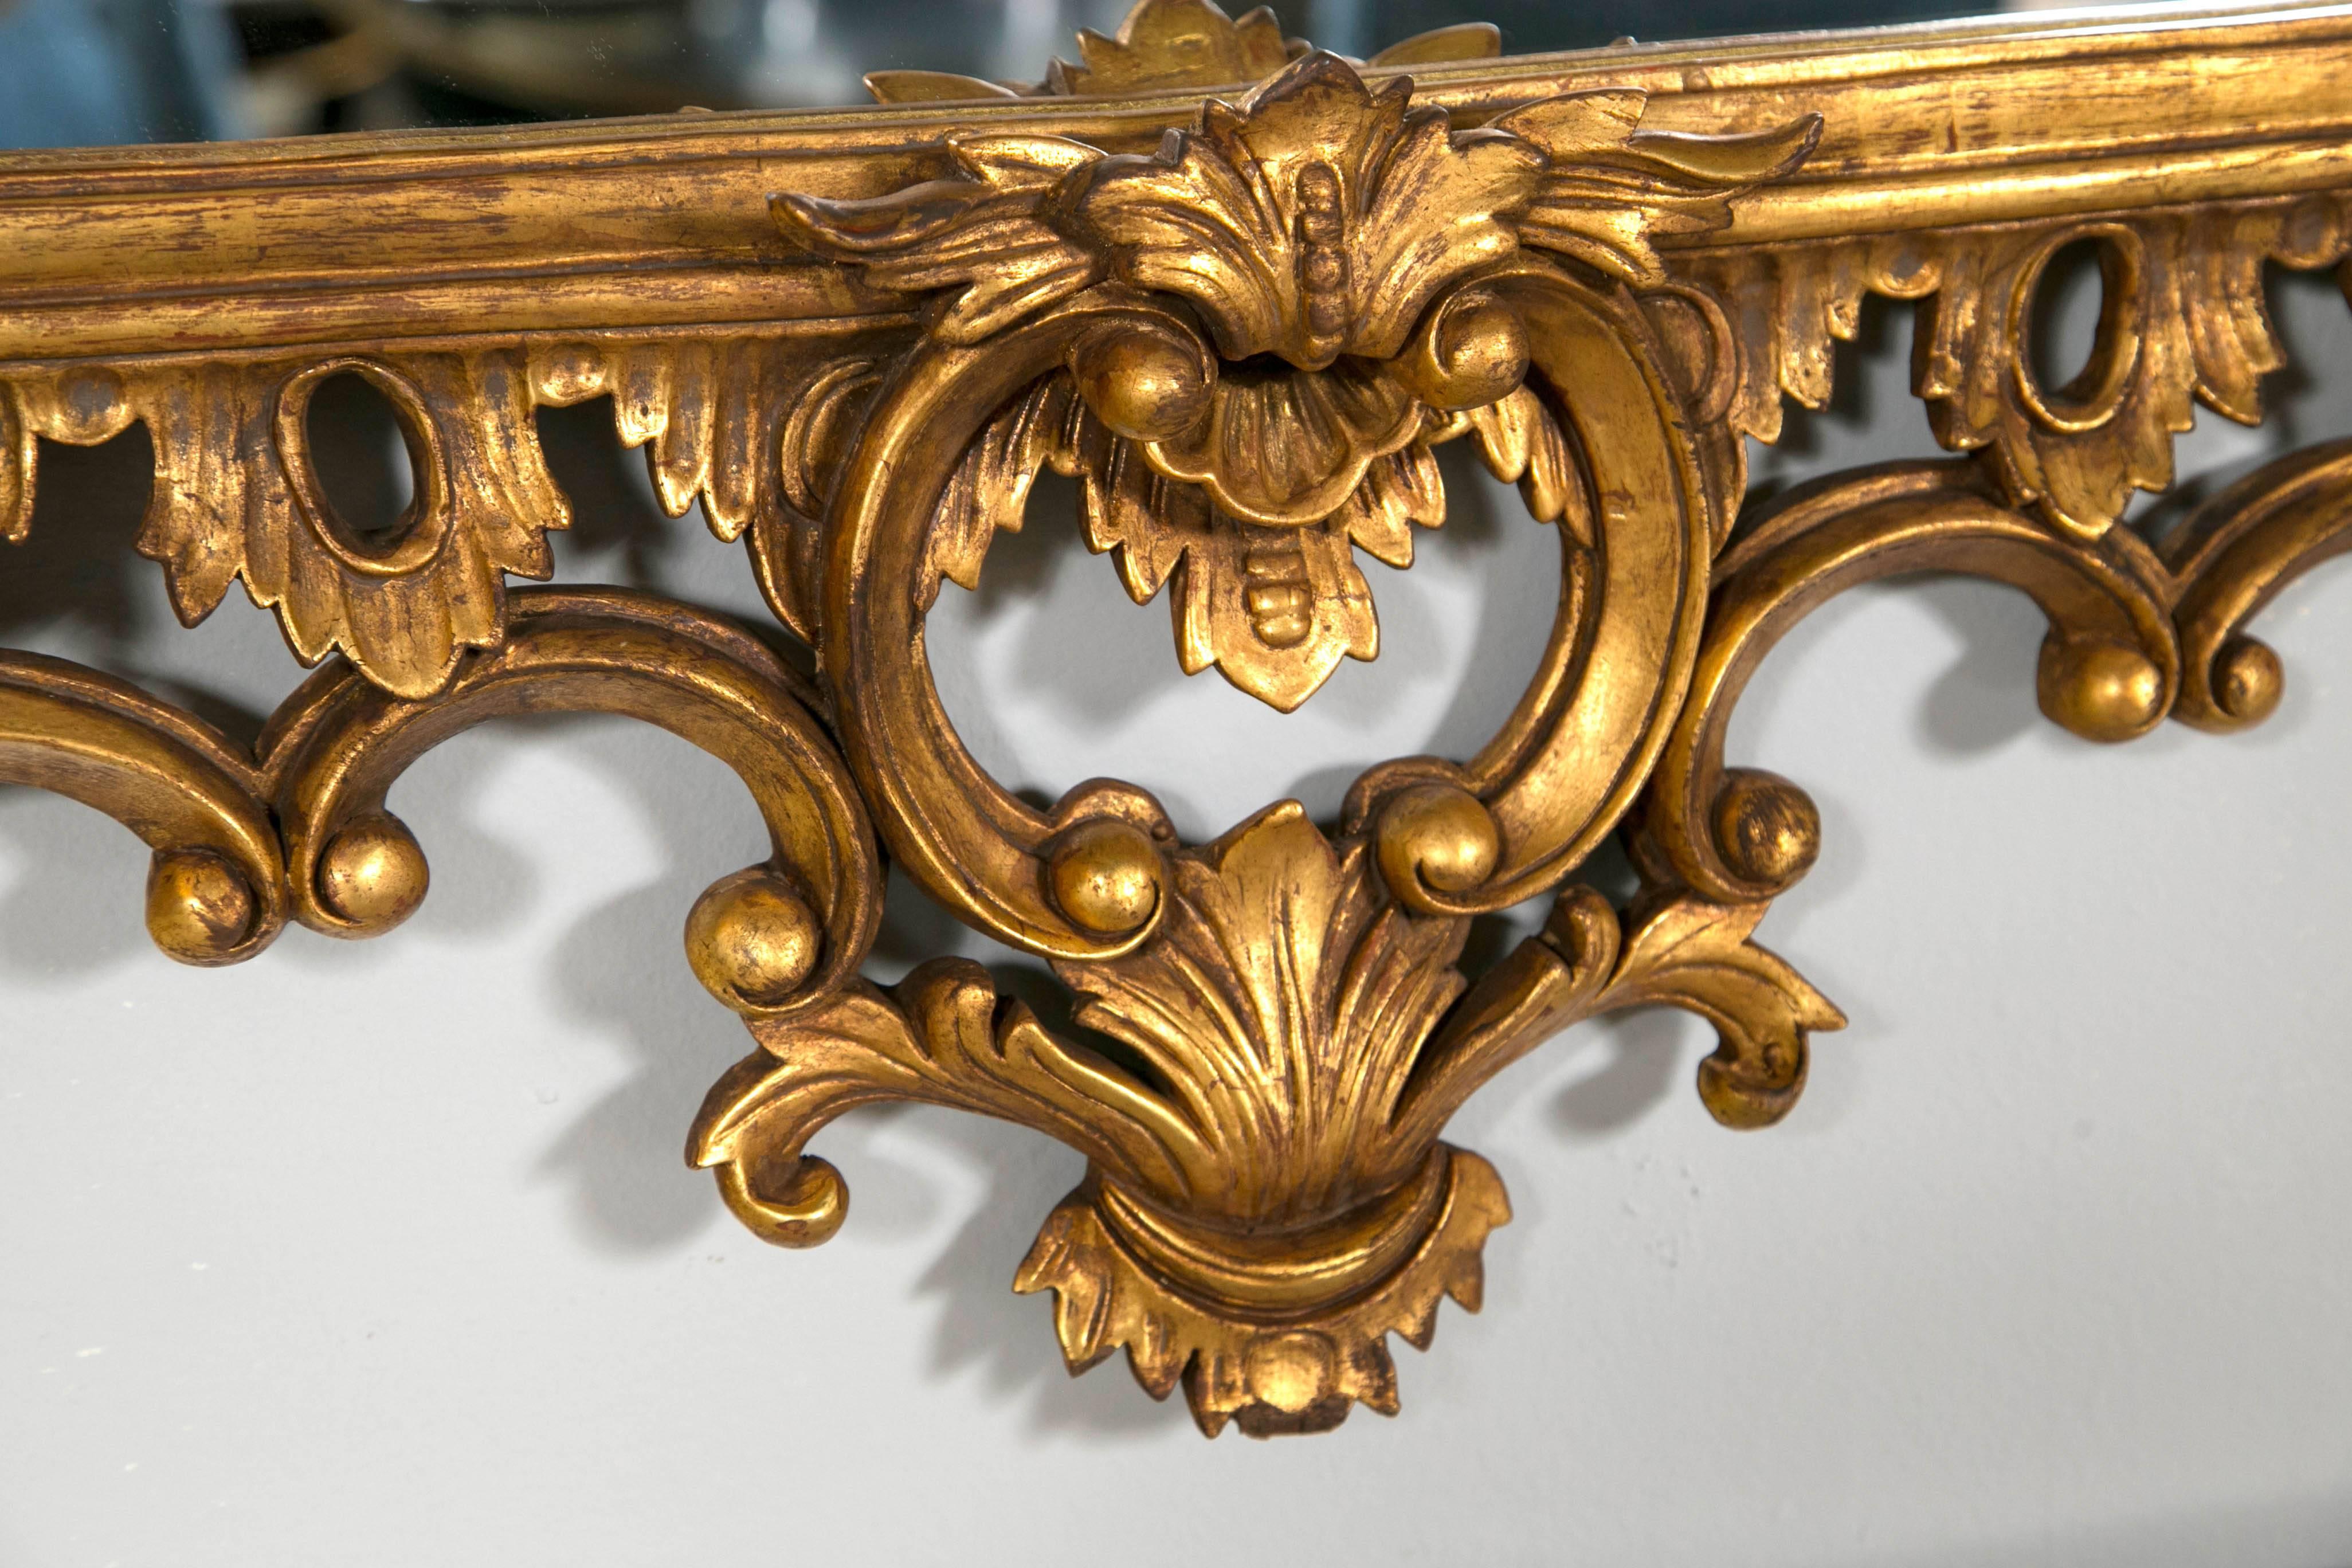 Pair of Chippendale giltwood carved wall or console mirrors. Each clean and clear center mirror framed in a spectacular carved gilt wooden frame with leaf and vine with scroll design. The backs all wooden. The open fretwork design on this fine pair